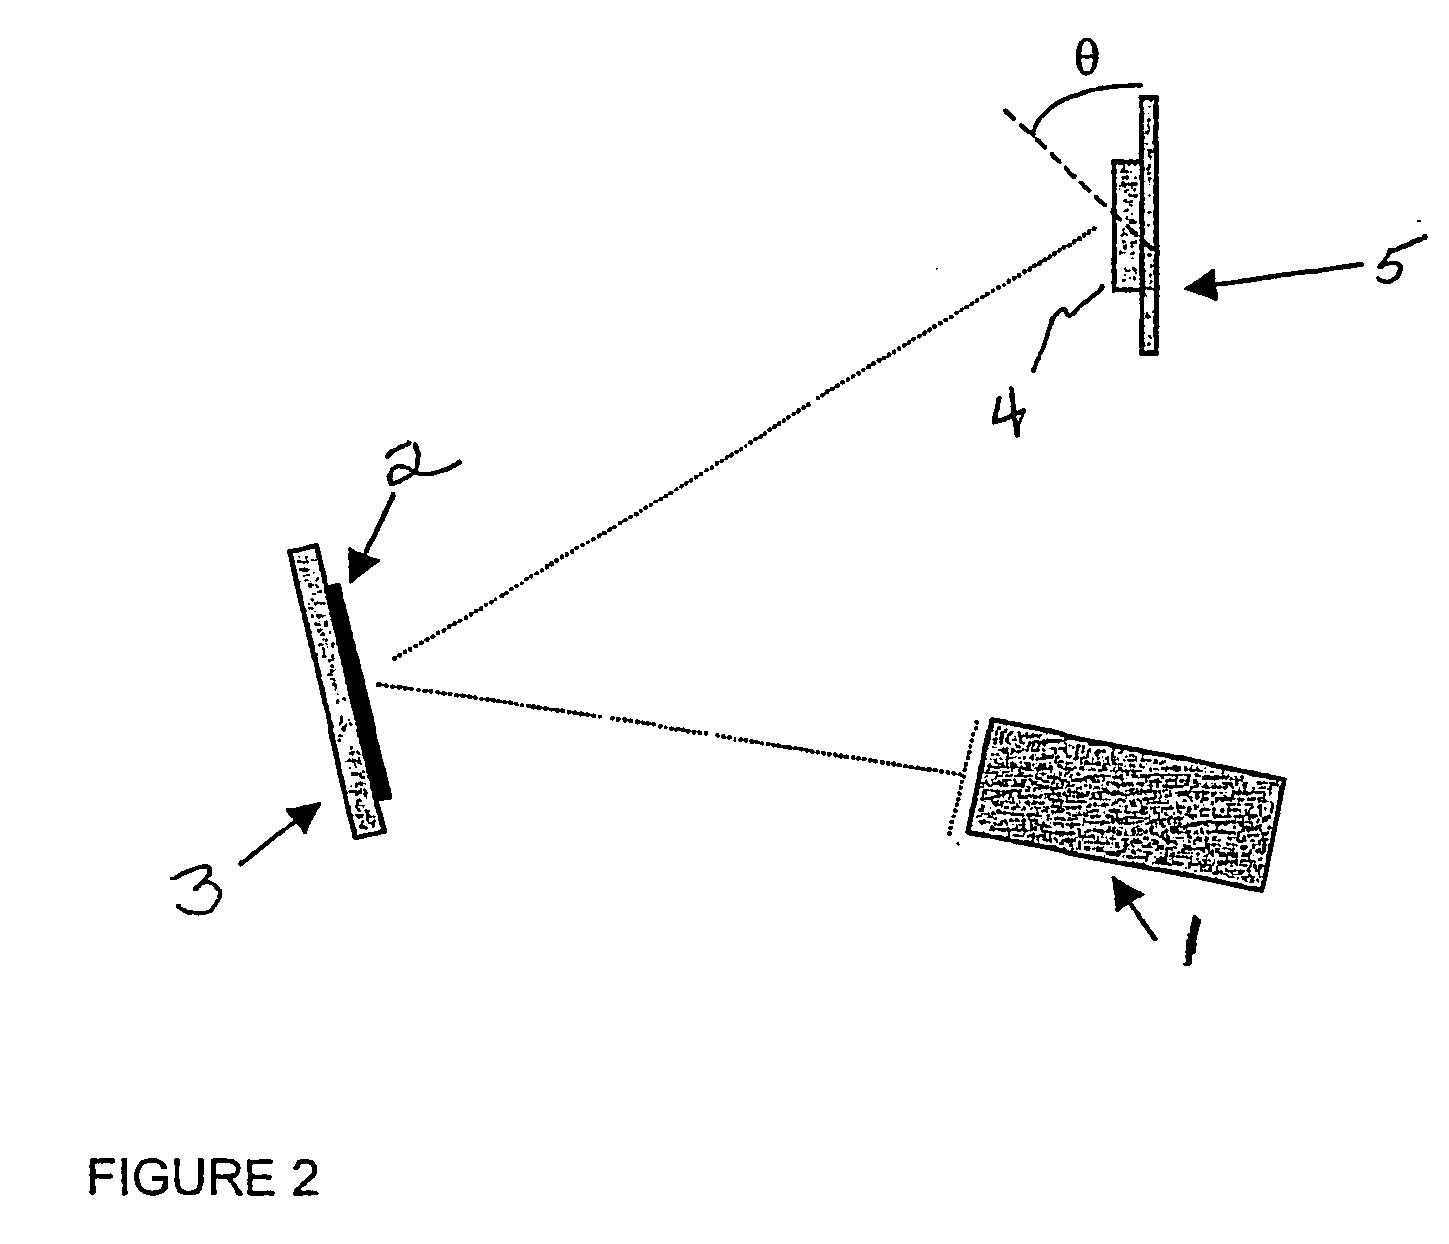 Ion-beam deposition process for manufacturing multi-layered attenuated phase shift photomask blanks